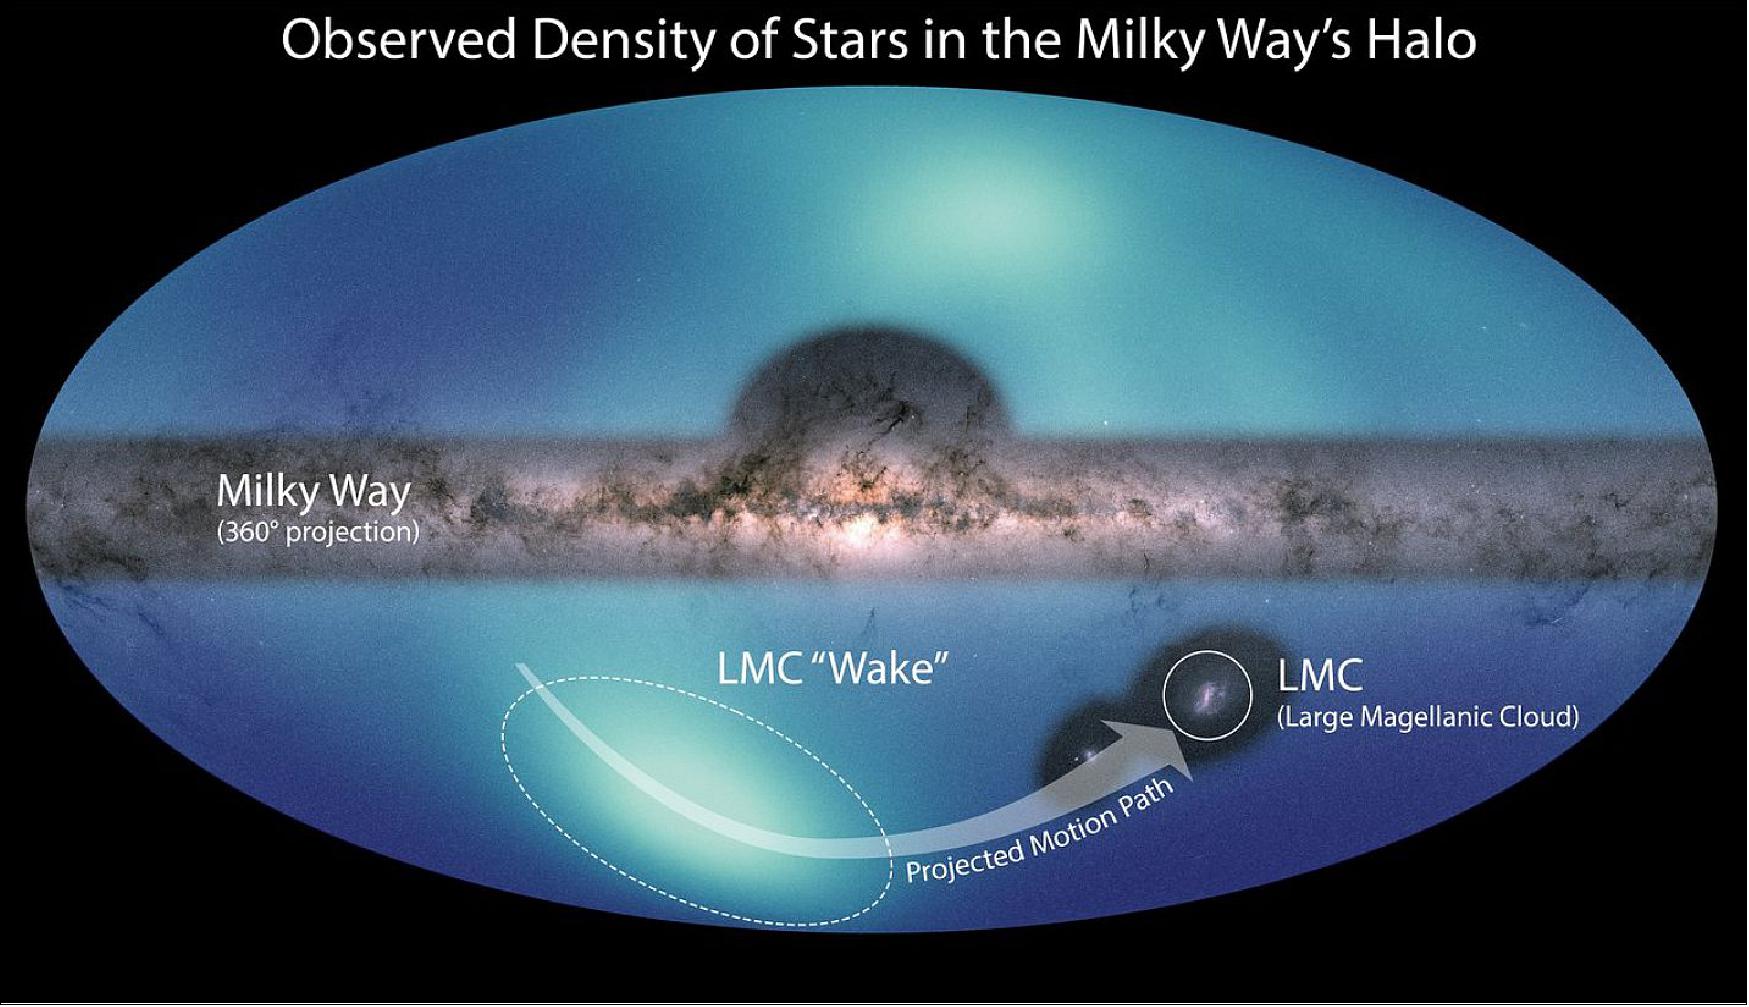 Figure 41: Images of the Milky Way and the Large Magellanic Cloud (LMC) are overlaid on a map of the surrounding galactic halo. The smaller structure is a wake created by the LMC’s motion through this region. The larger light-blue feature corresponds to a high density of stars observed in the northern hemisphere of our galaxy. The highlight of the new chart is a wake of stars, stirred up by a small galaxy set to collide with the Milky Way. The map could also offer a new test of dark matter theories (image credit: NASA/ESA/JPL-Caltech, Conroy et. al. 2021)